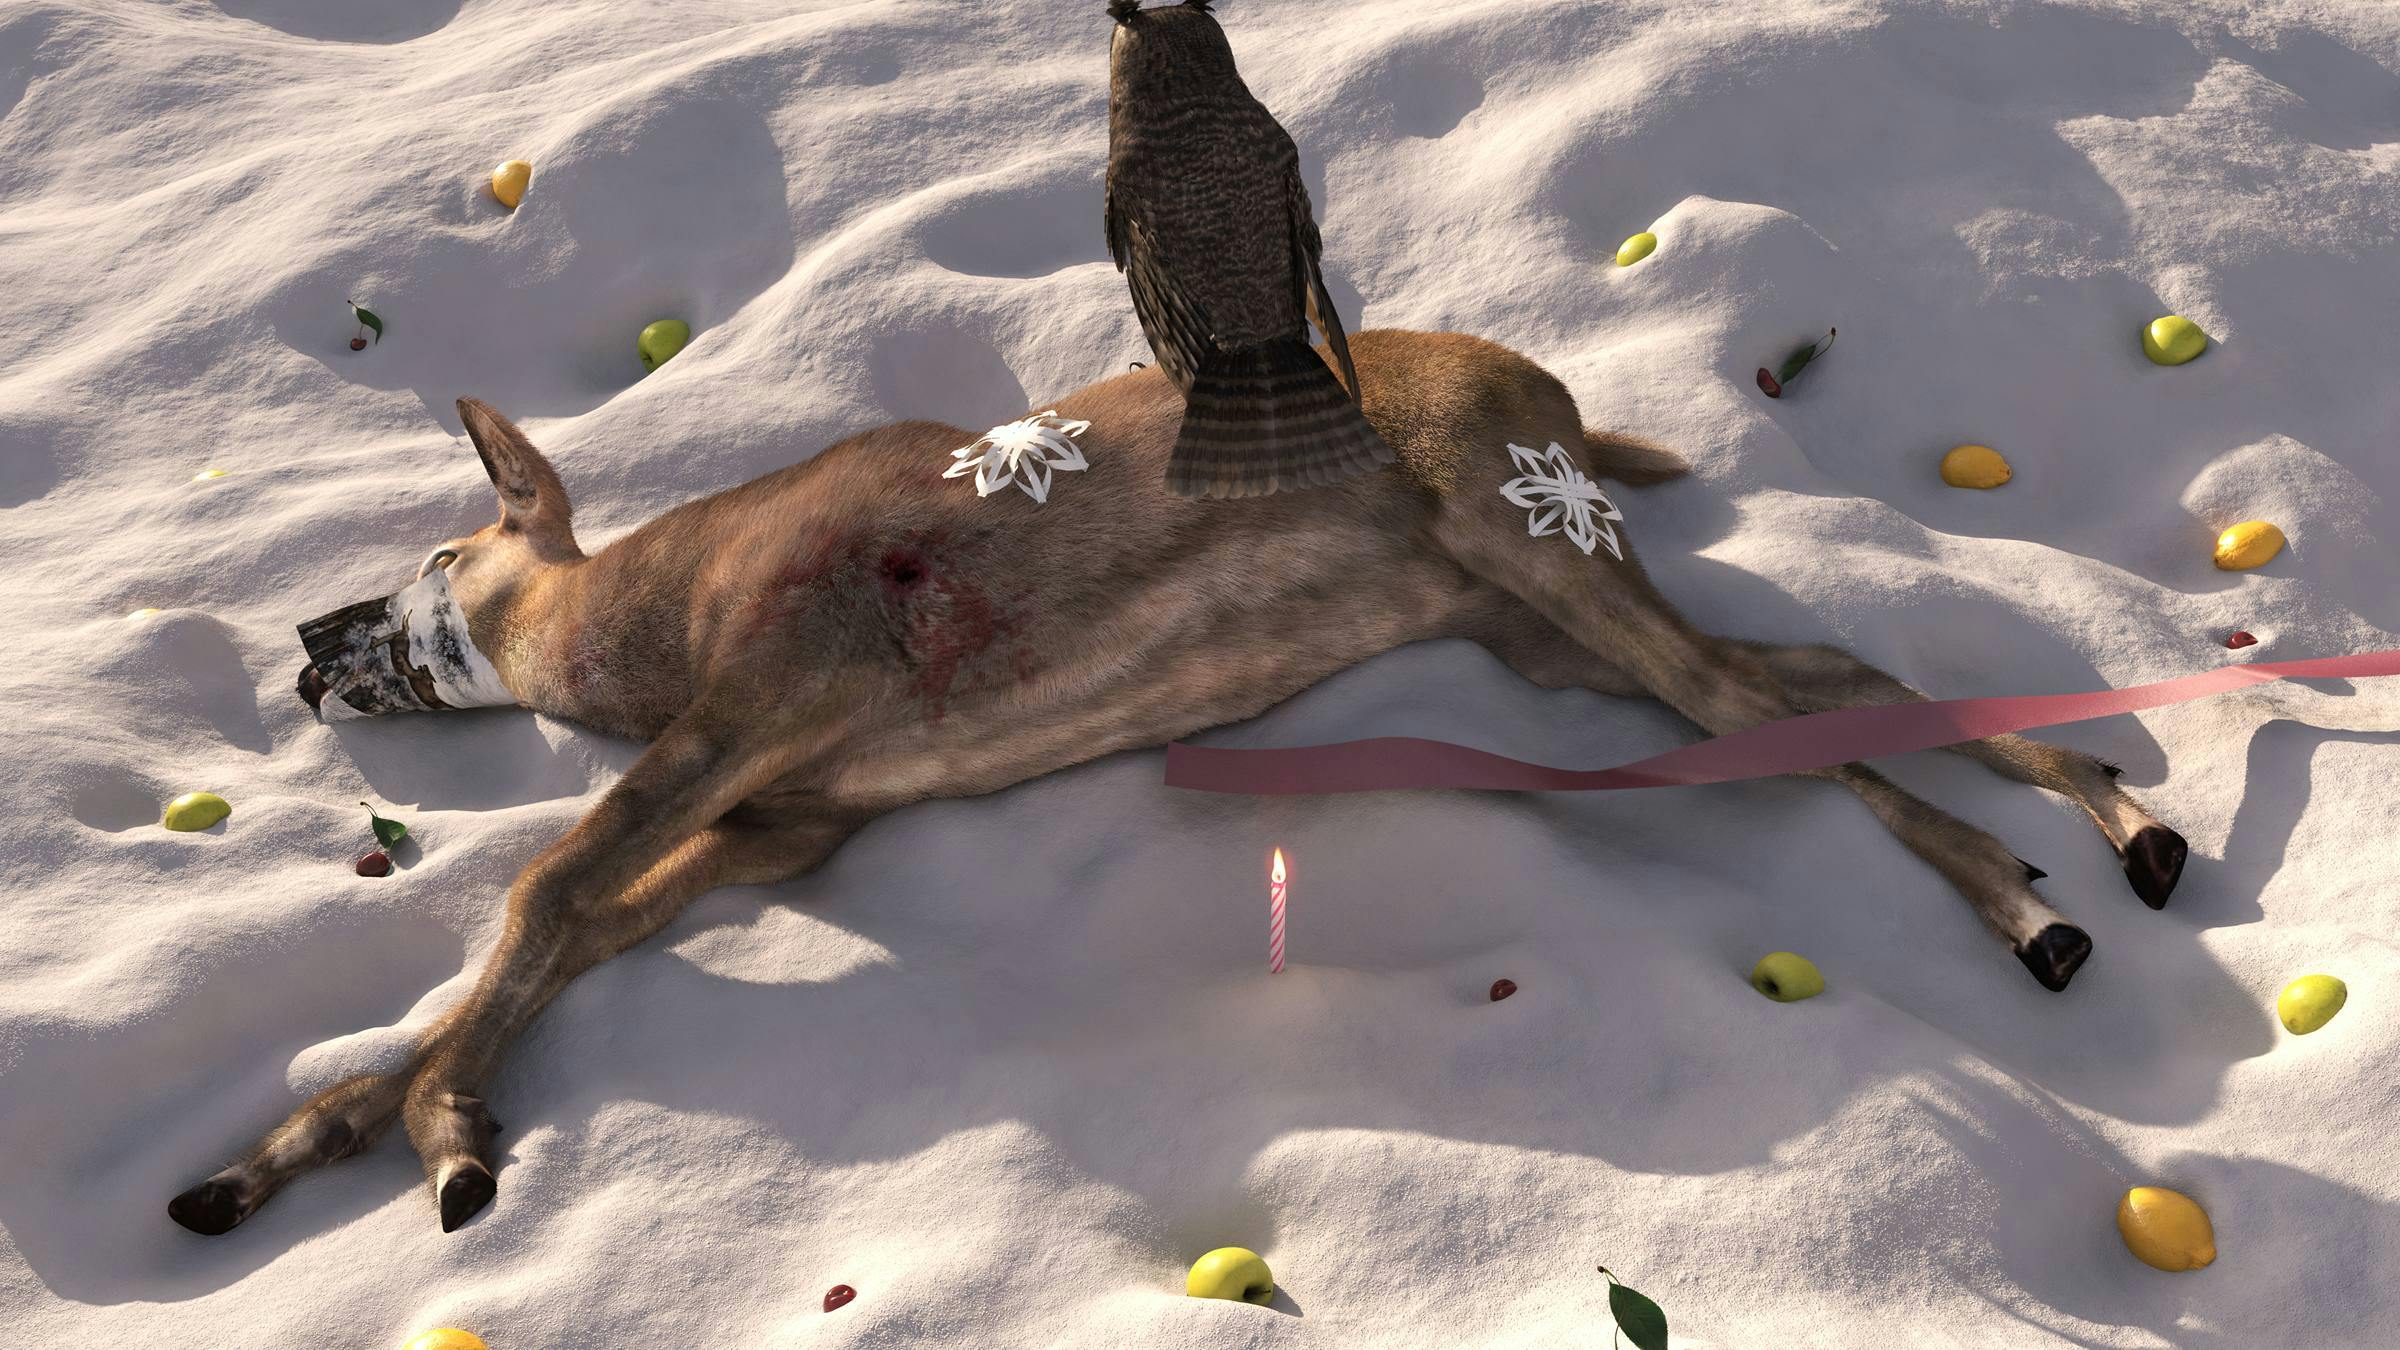 Dead deer with an owl sat on top and large snowflake patterns on its back. Lemons are placed in the snow surrounding it.